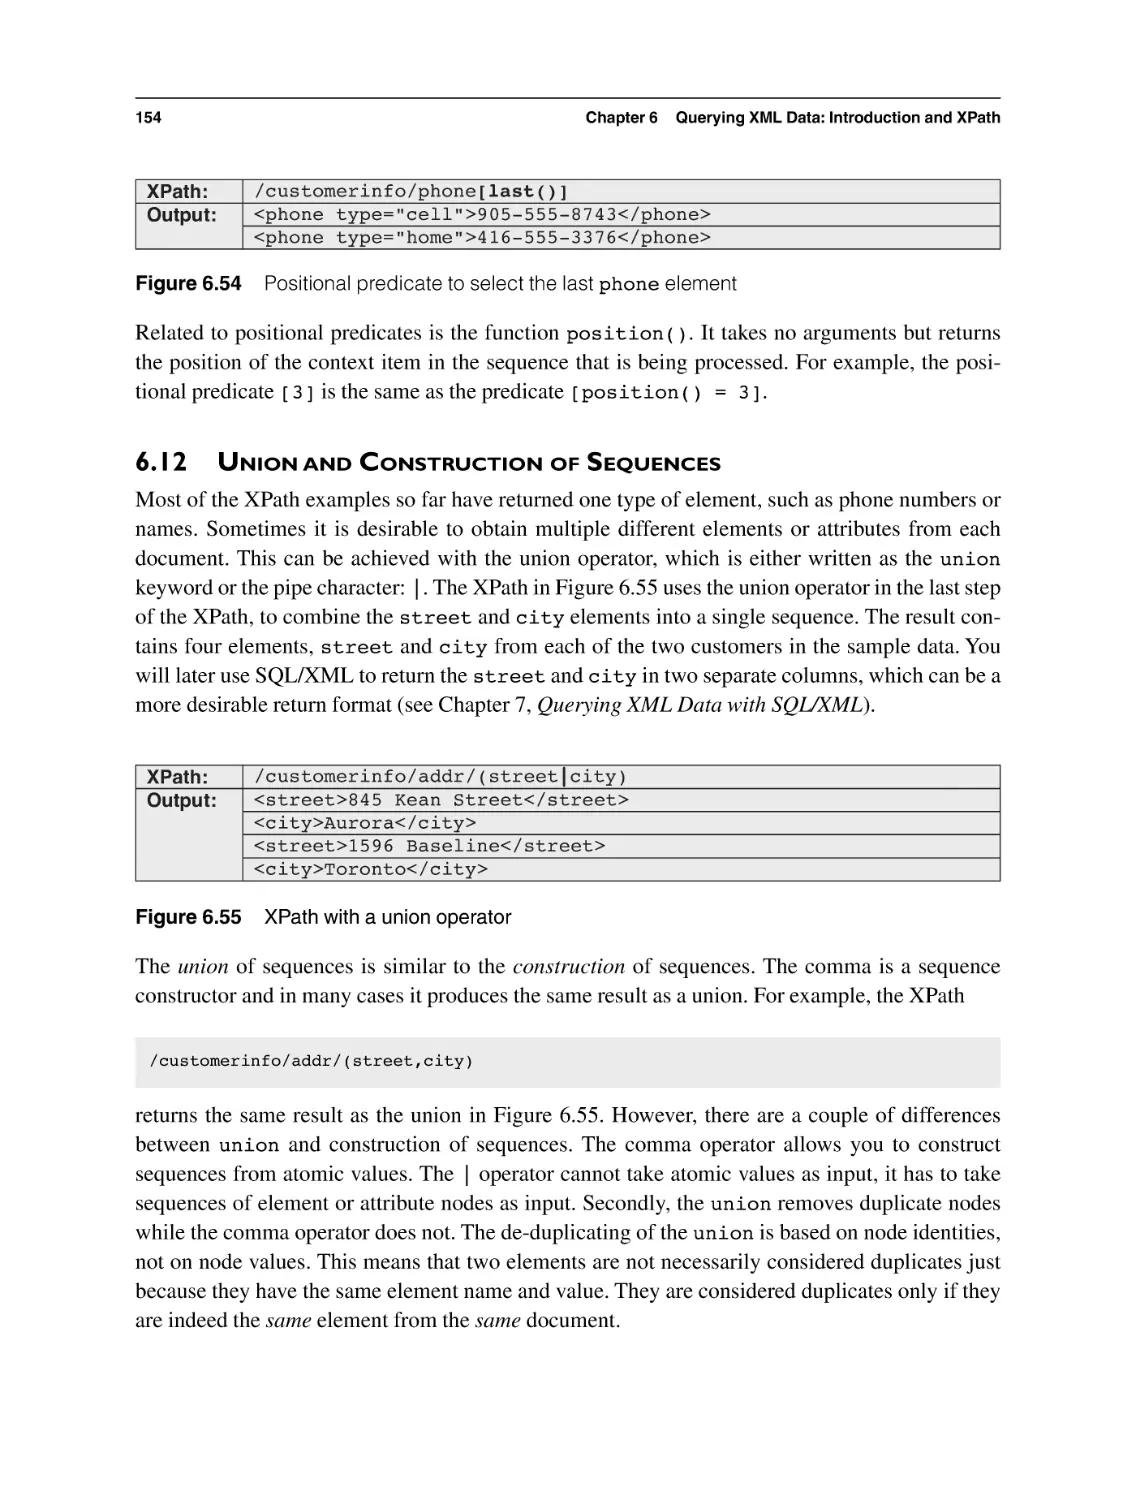 6.12 Union and Construction of Sequences